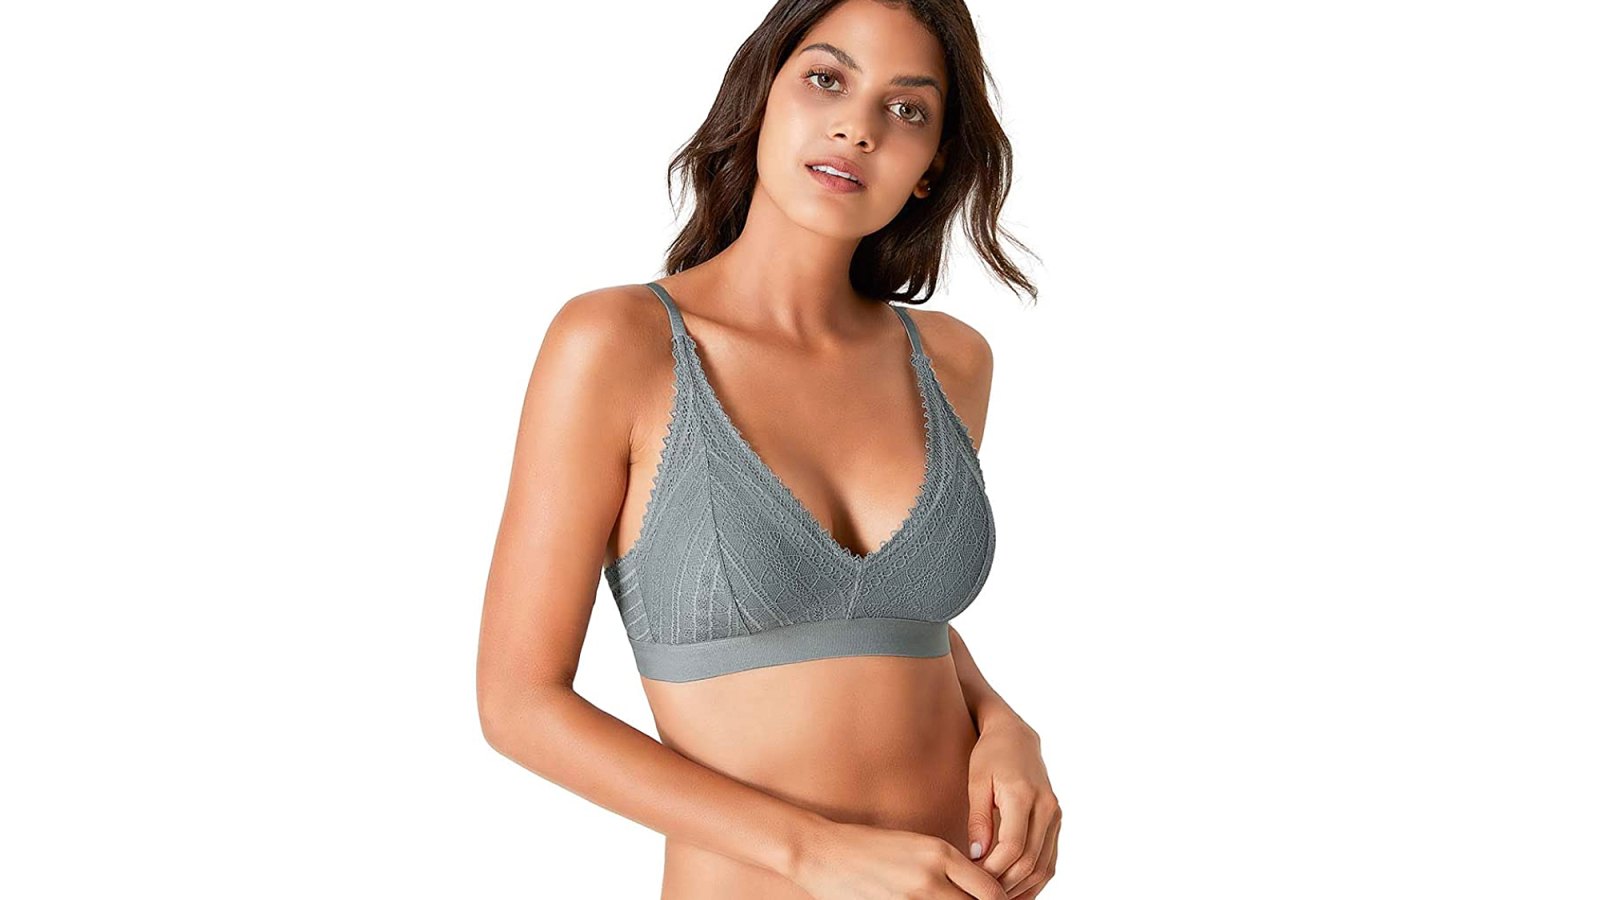 Rolewpy Bralette Will Make You Want To Throw Out Your Wire Bras